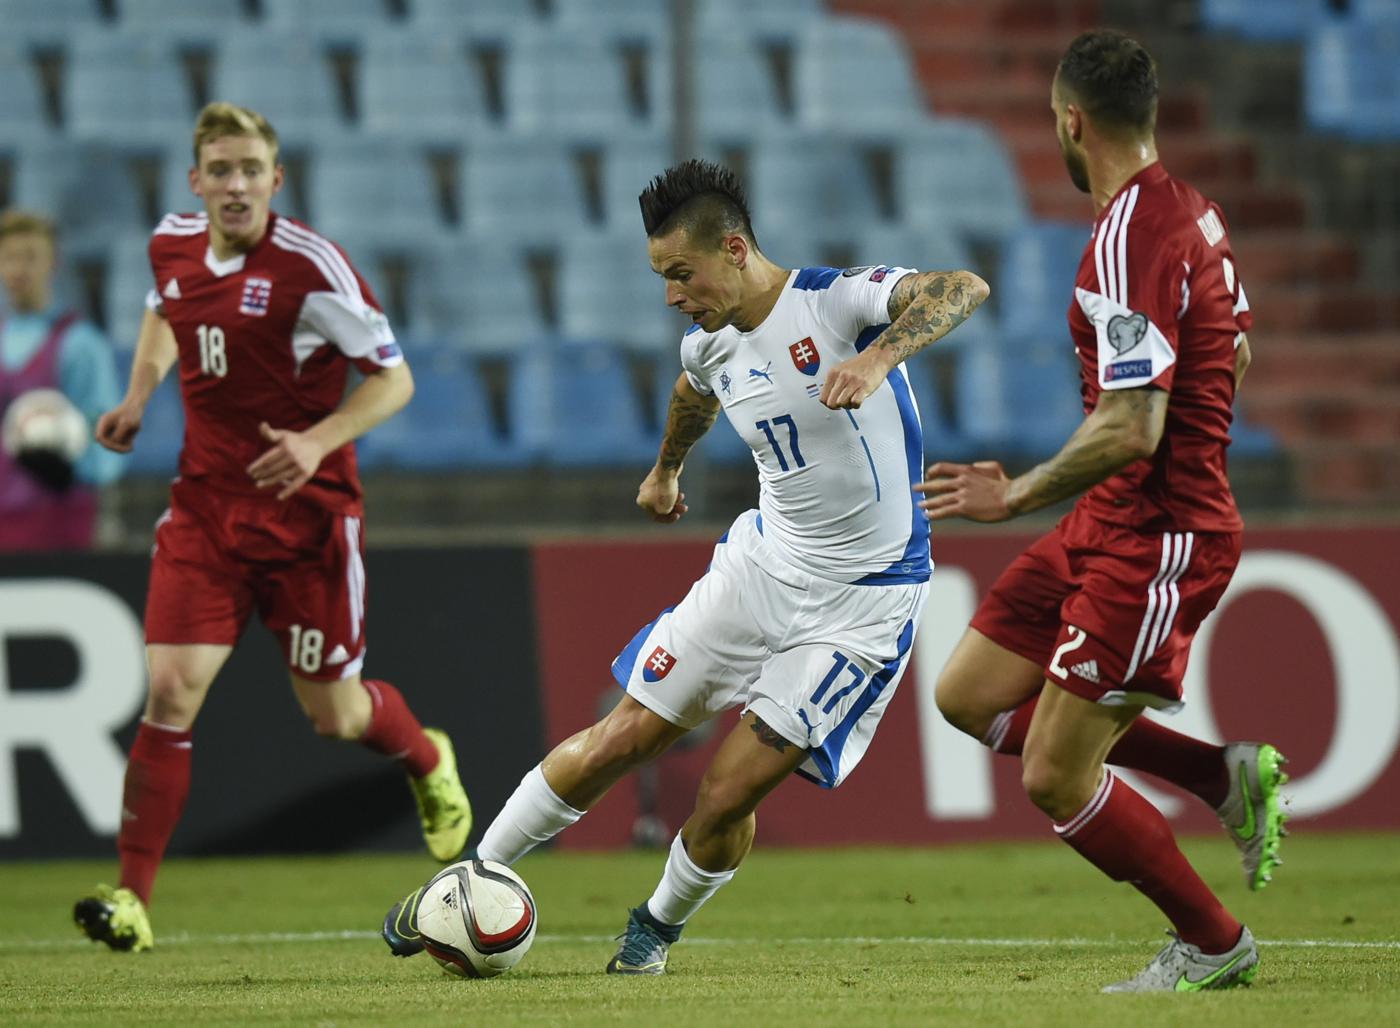 Slovakia v Luxembourg - 0:0. Euro 2024. Match review, statistics